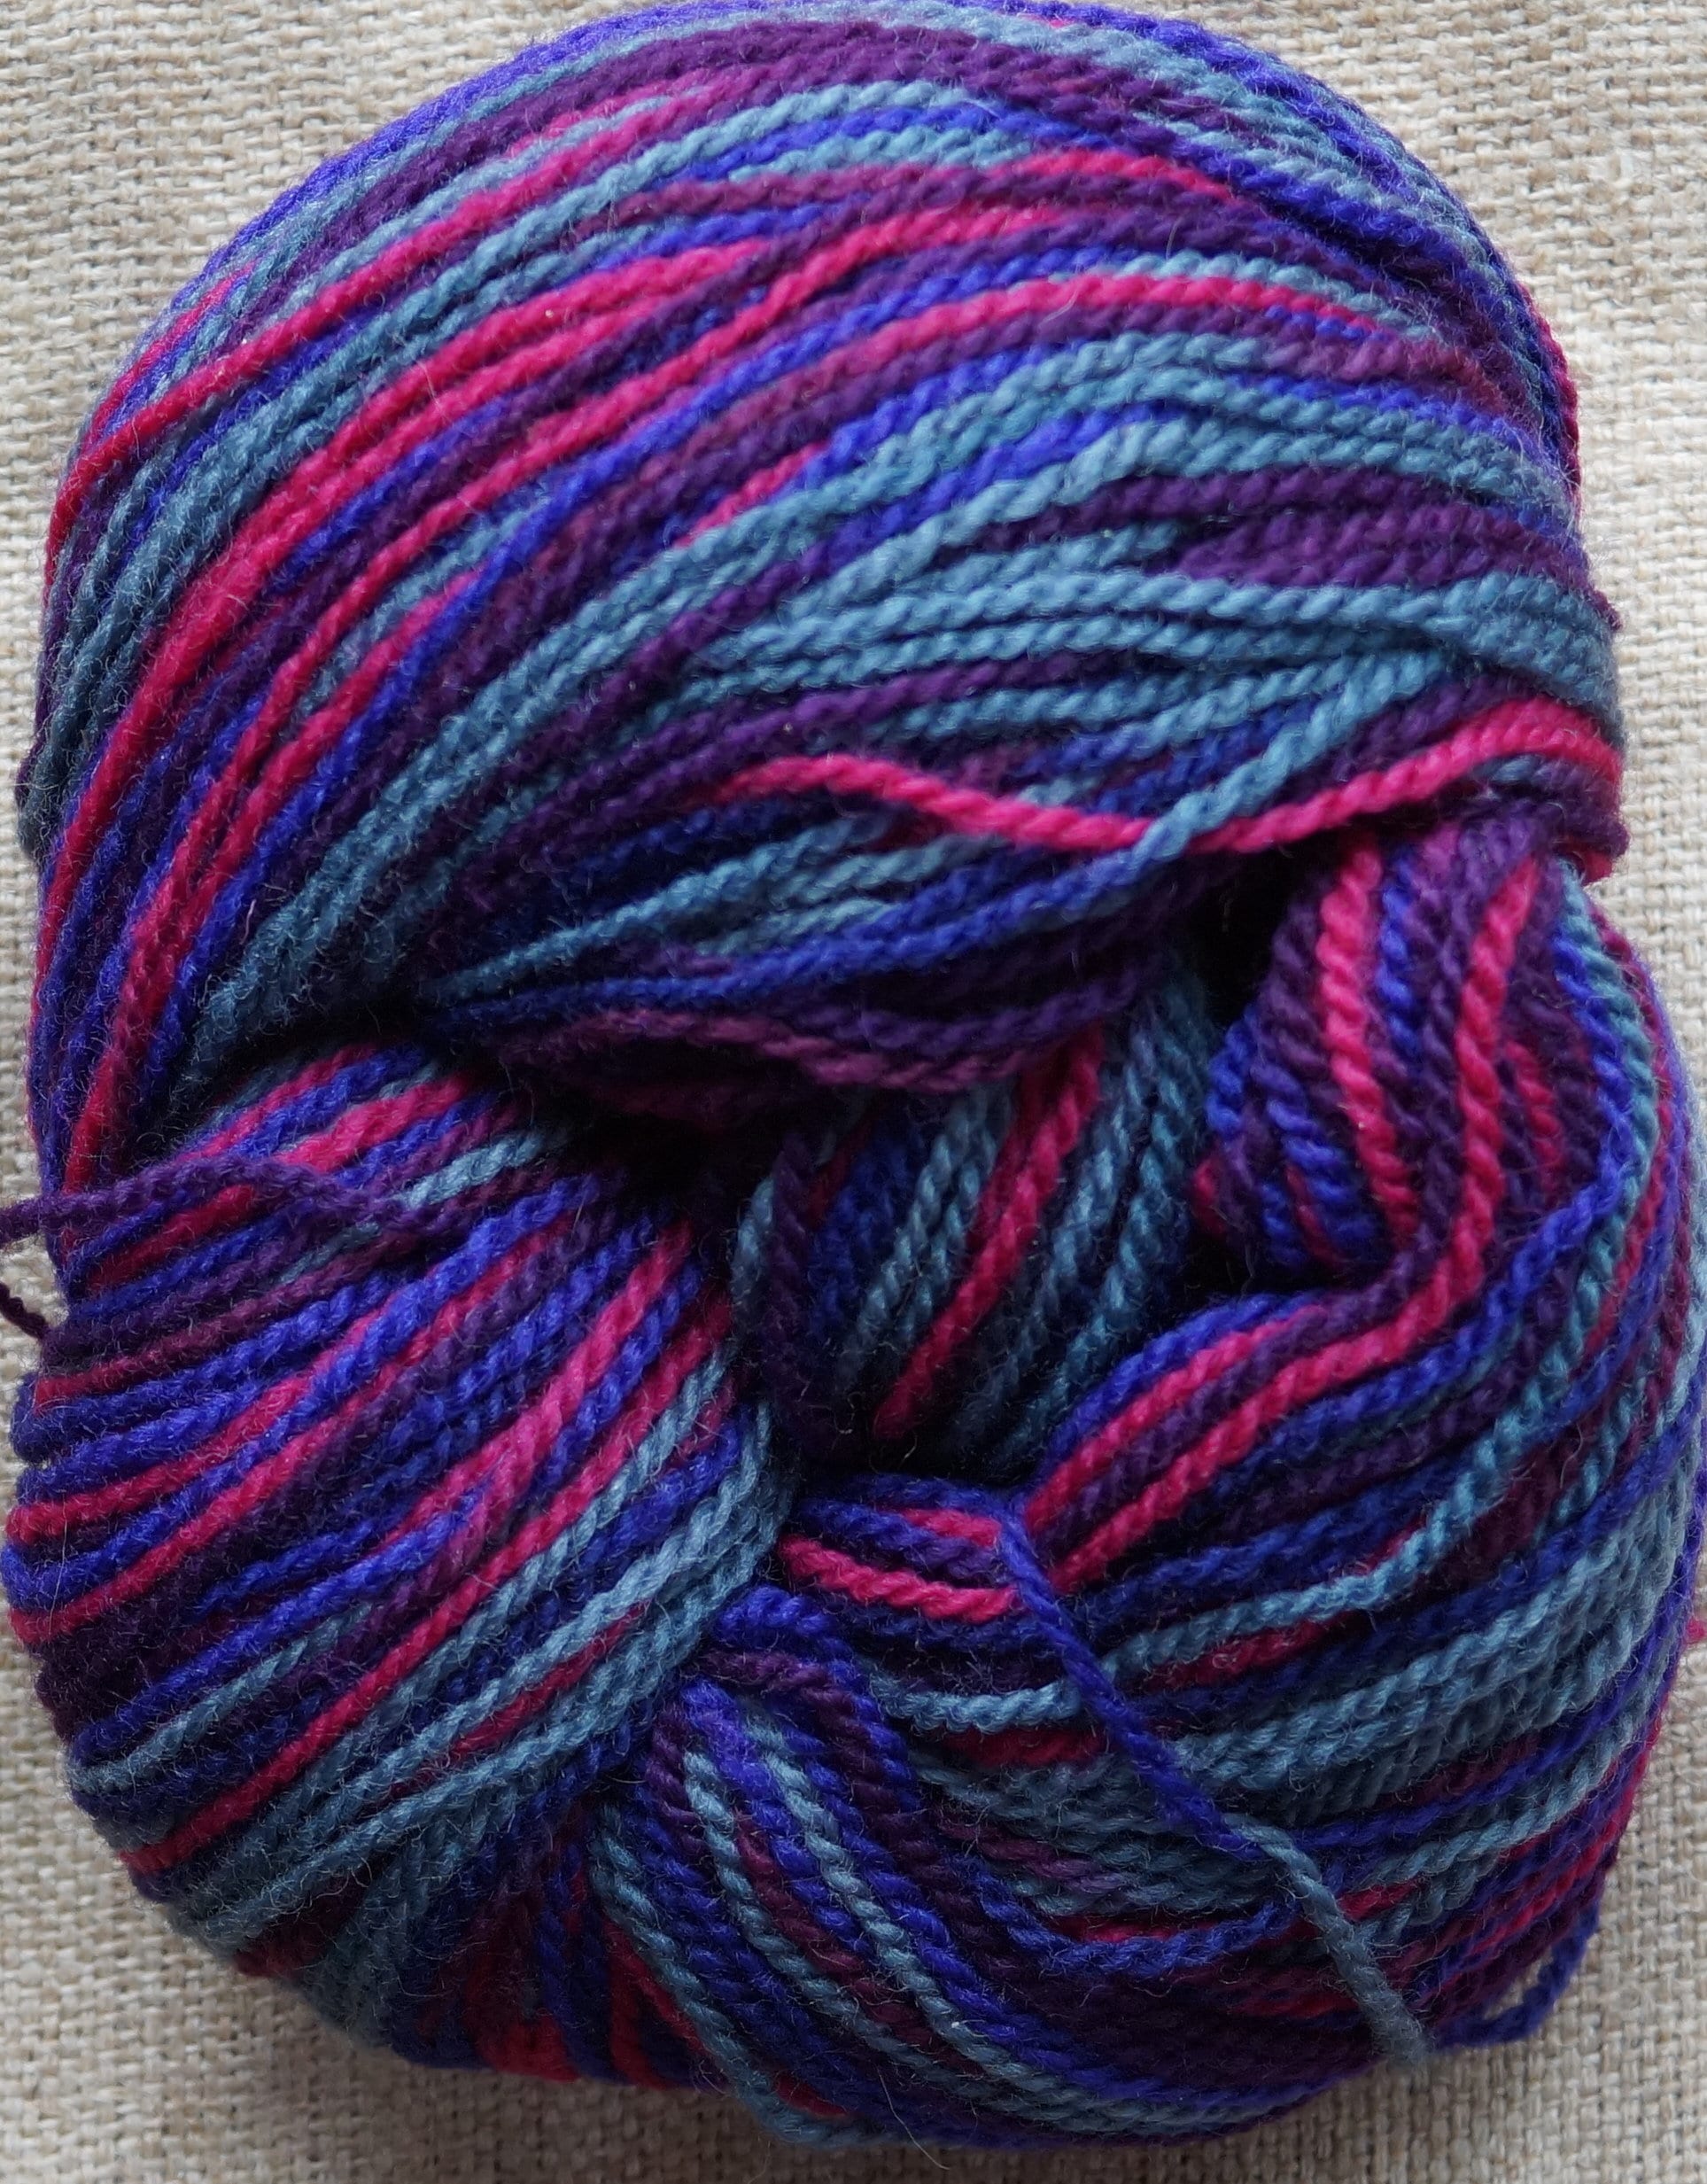 Worsted yarn: Multicolor pink-purple-gray worsted wool yarn 594 yds, free  shipping offer